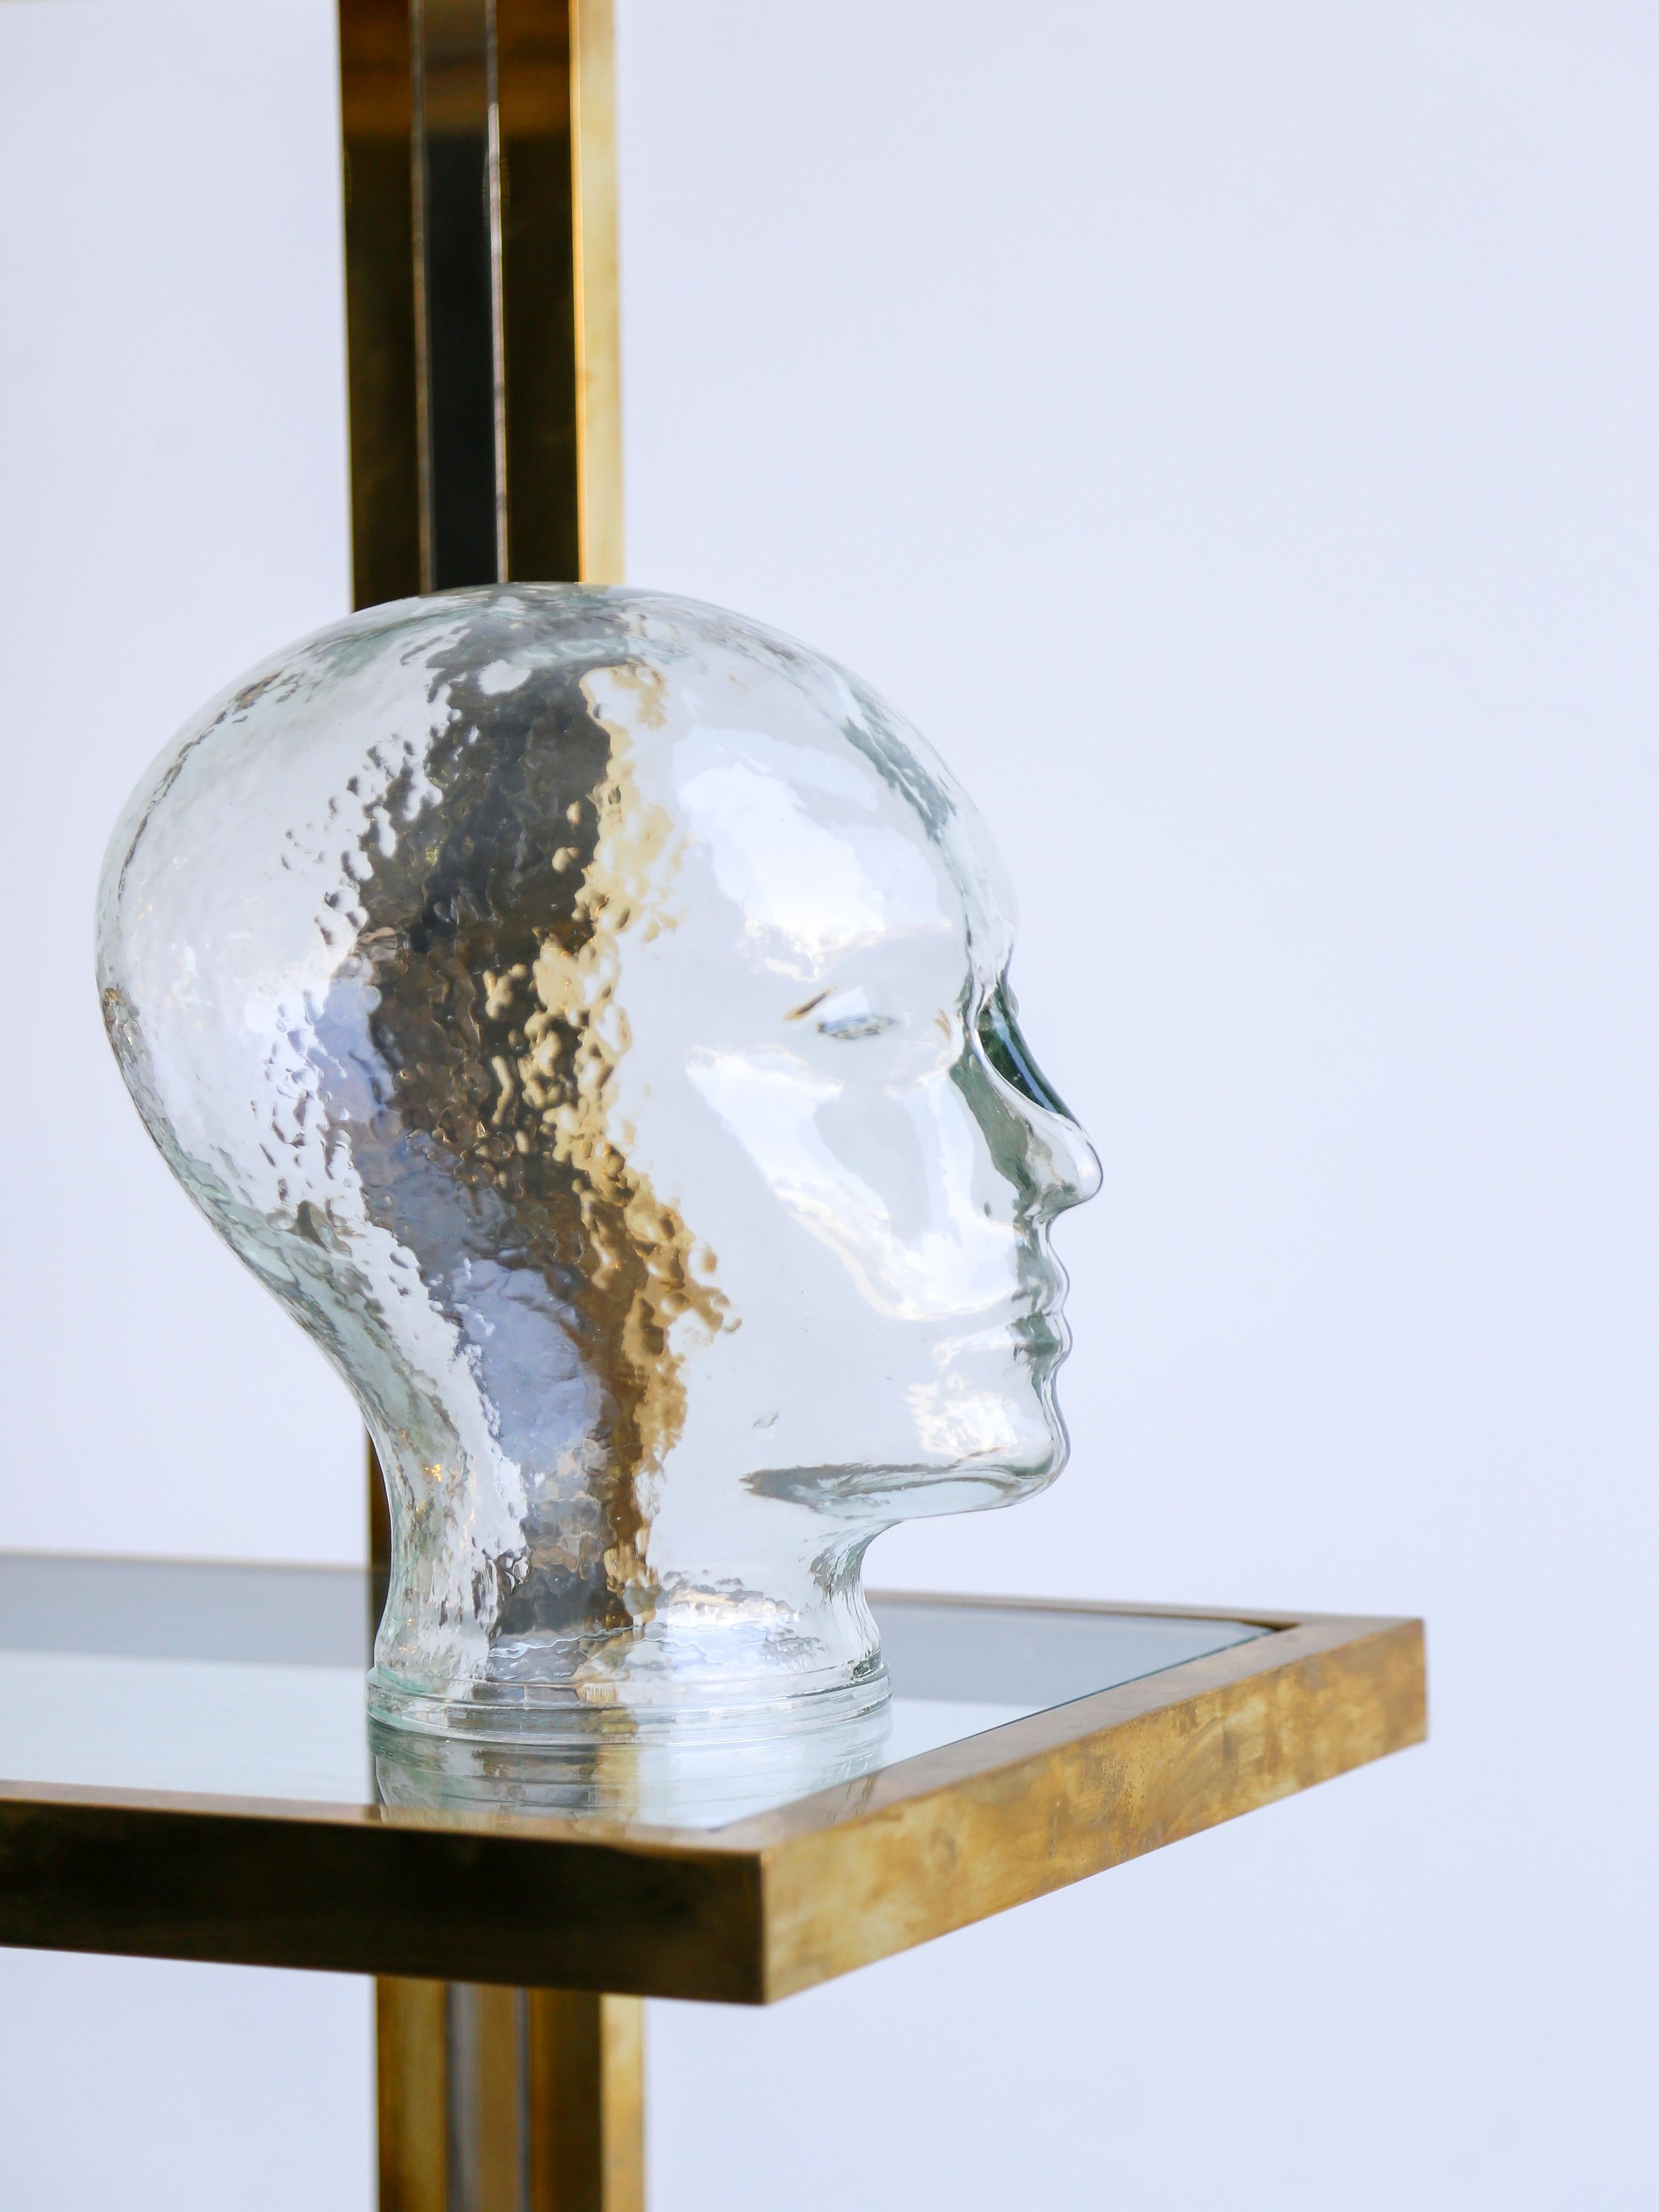 Mid Century Modern crystal glass head table sculpture by the famous Piero Fornasetti. 

Piero Fornasetti (1913–1988) was an Italian designer and artist known for his creative and whimsical designs across various disciplines, including furniture,